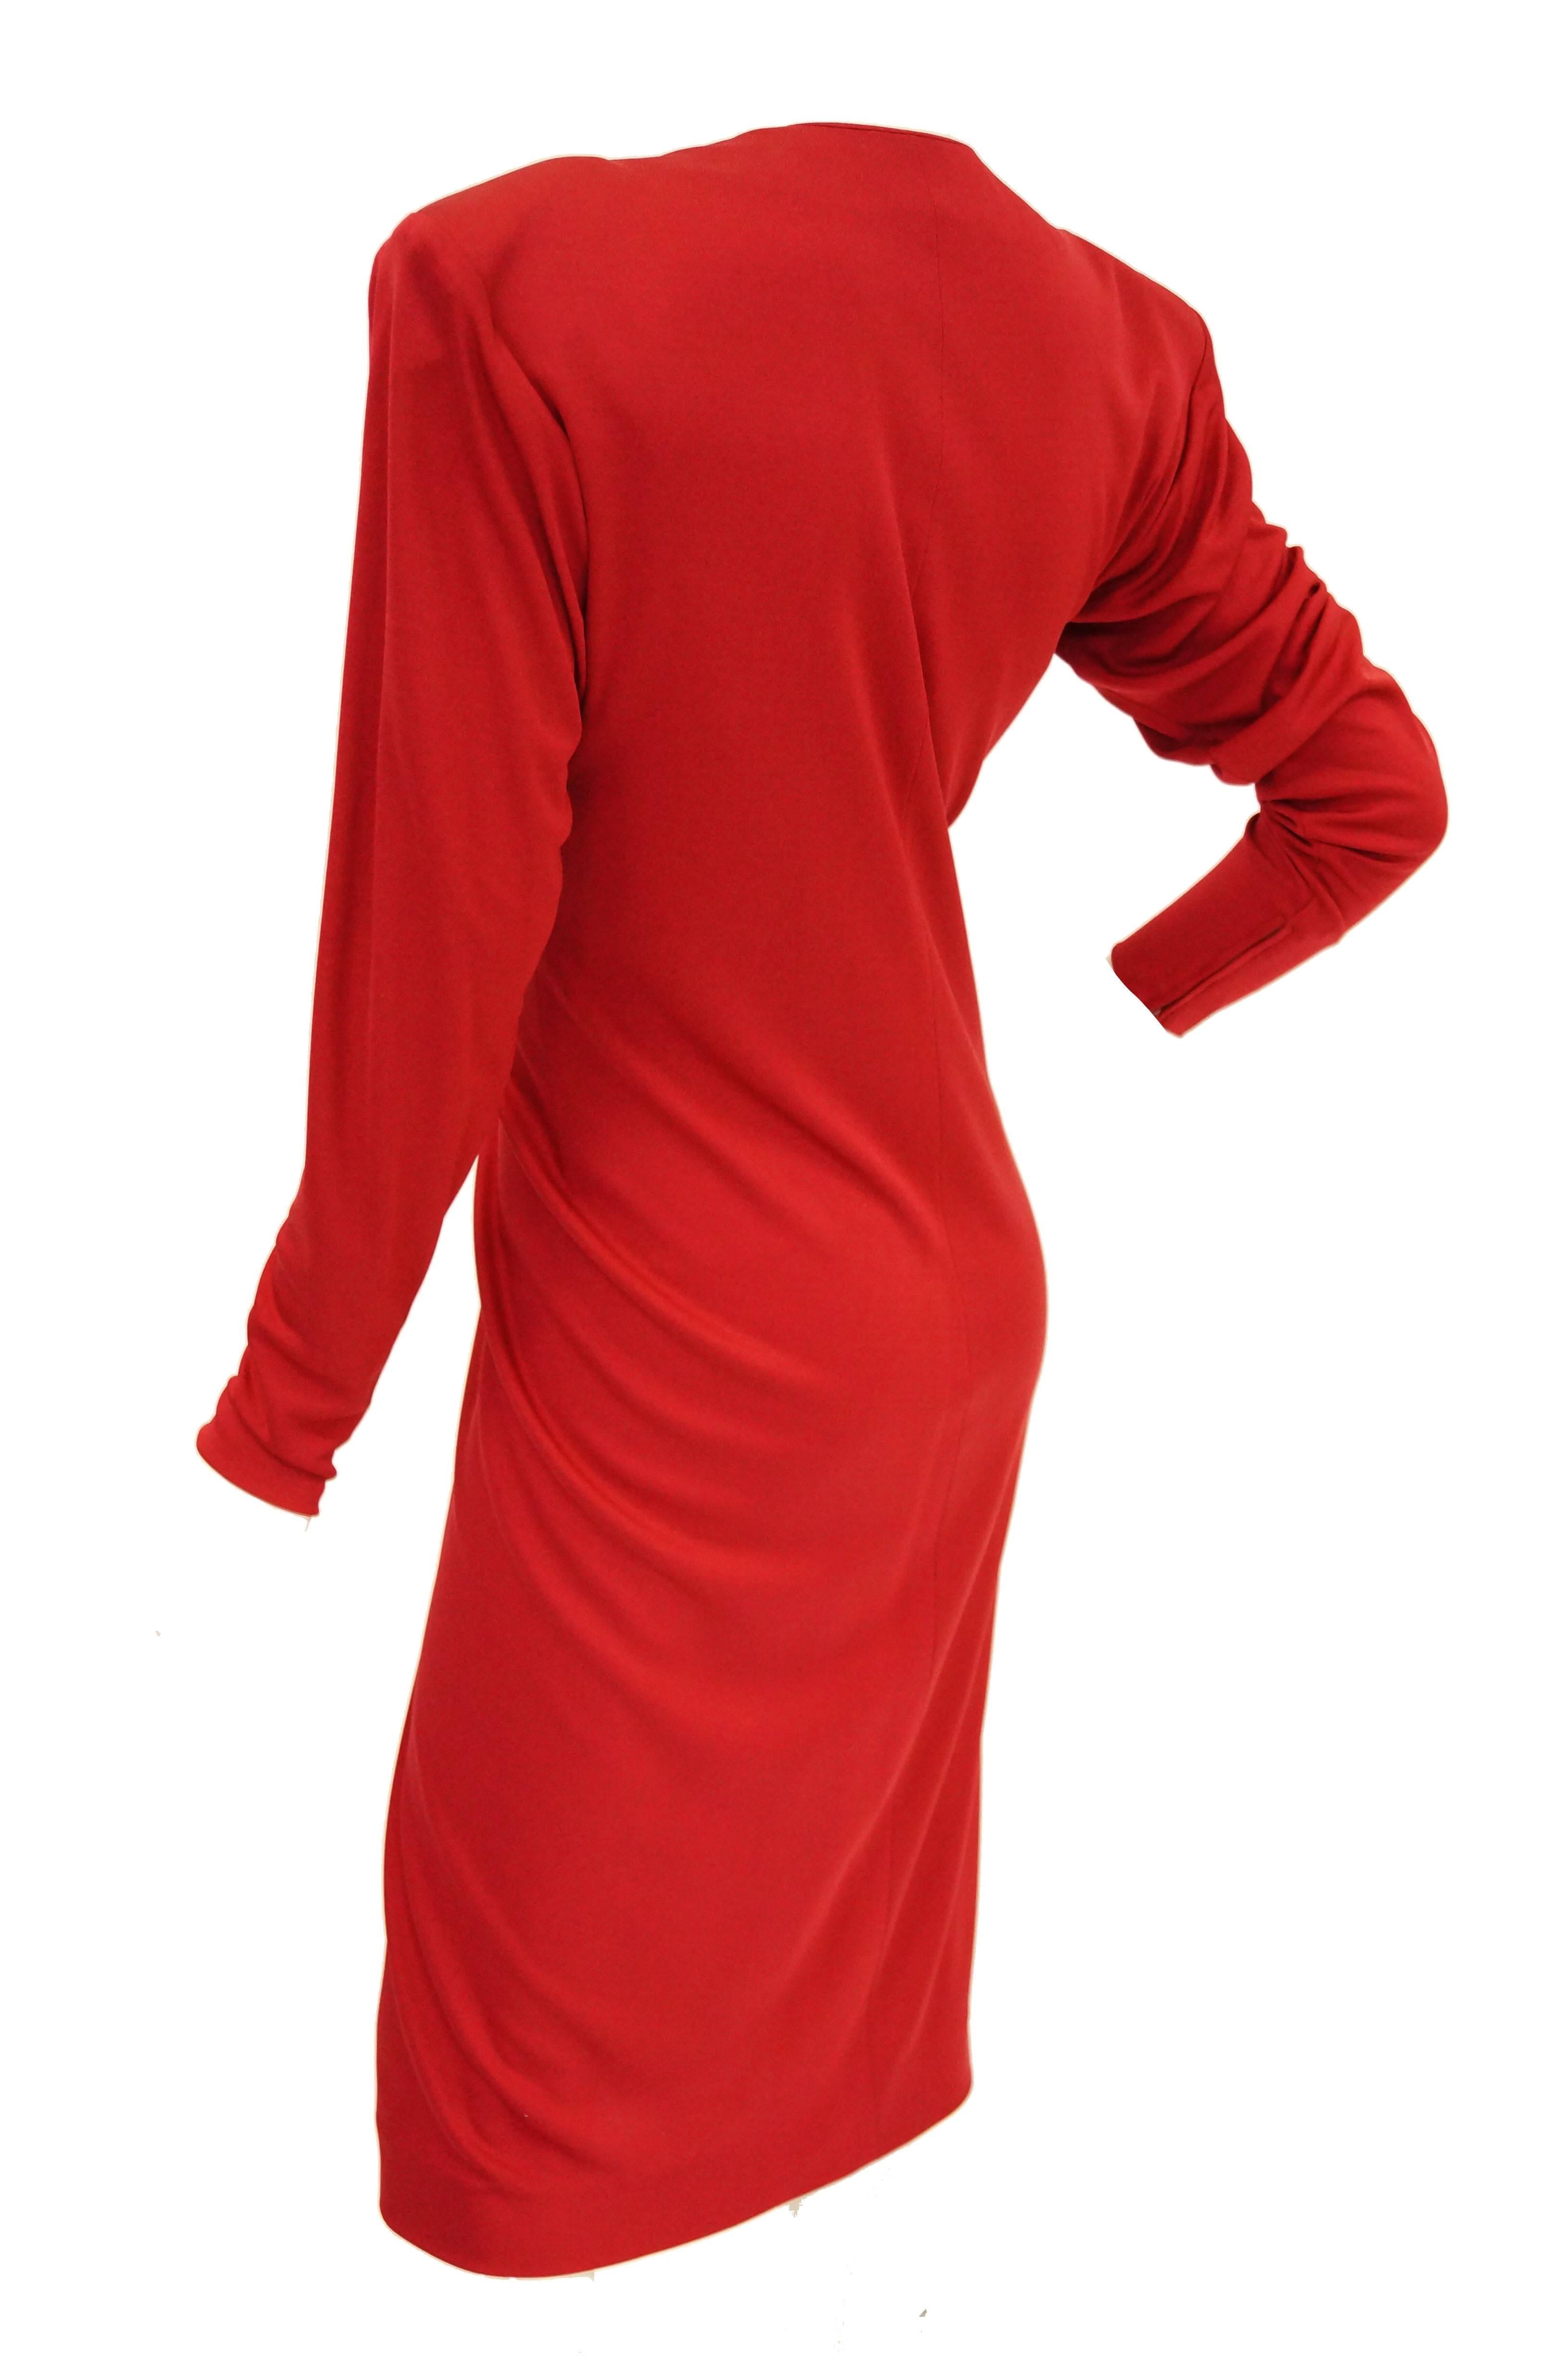 Yves Saint Laurent Silk Jersey Red Plunge Front Dress, 1980s 2